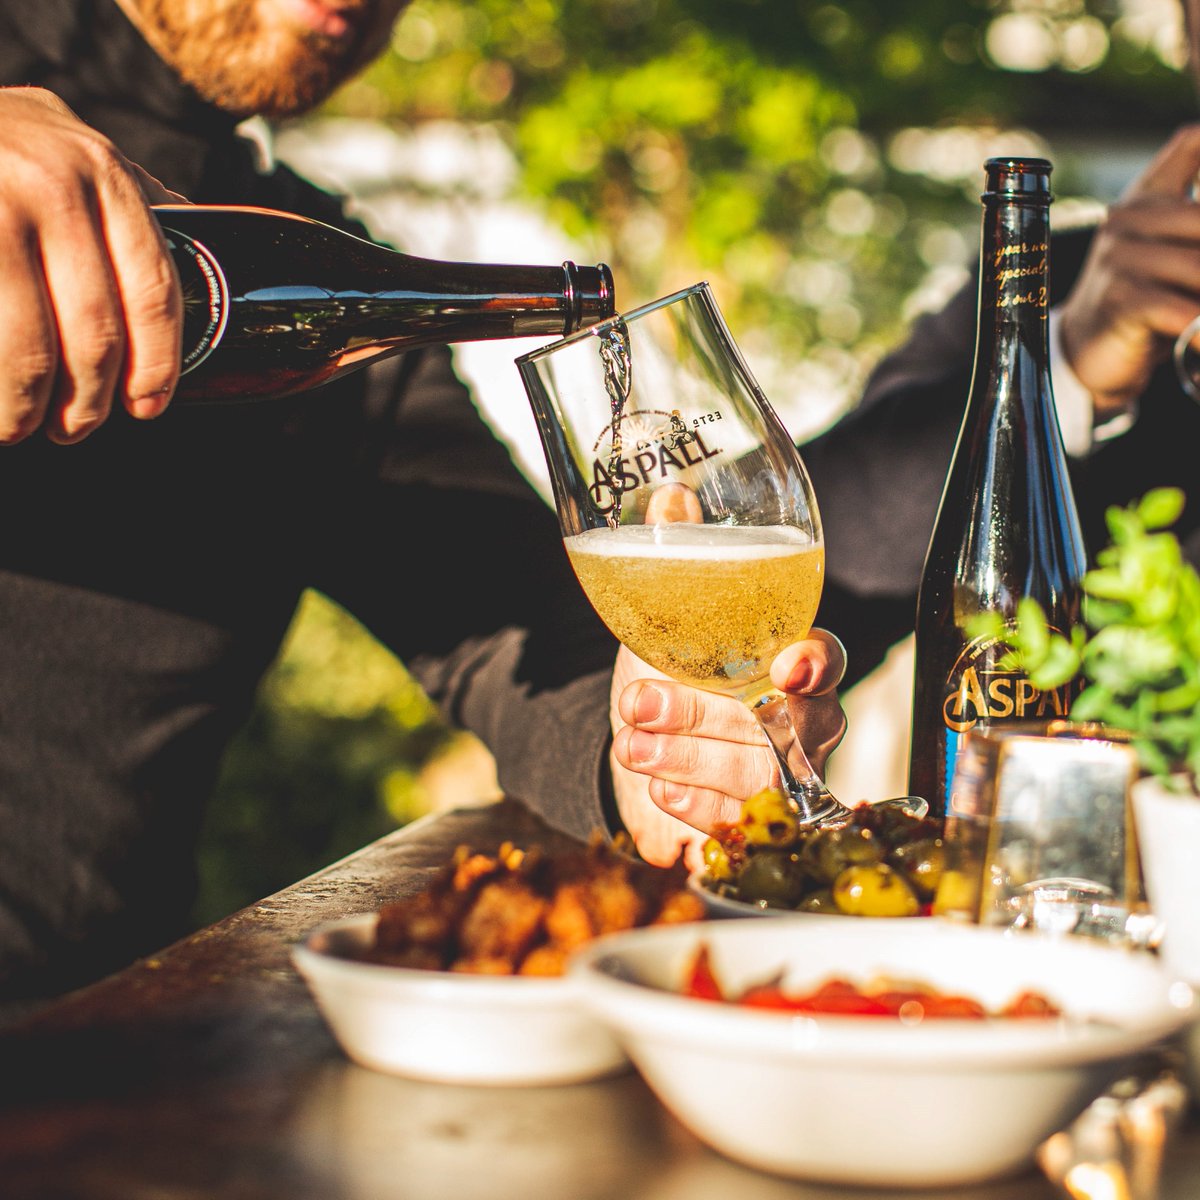 A night at the pub: starring Aspall Cyder (featuring your favourite bar snacks) 🥂🥨 Please Drink Responsibly